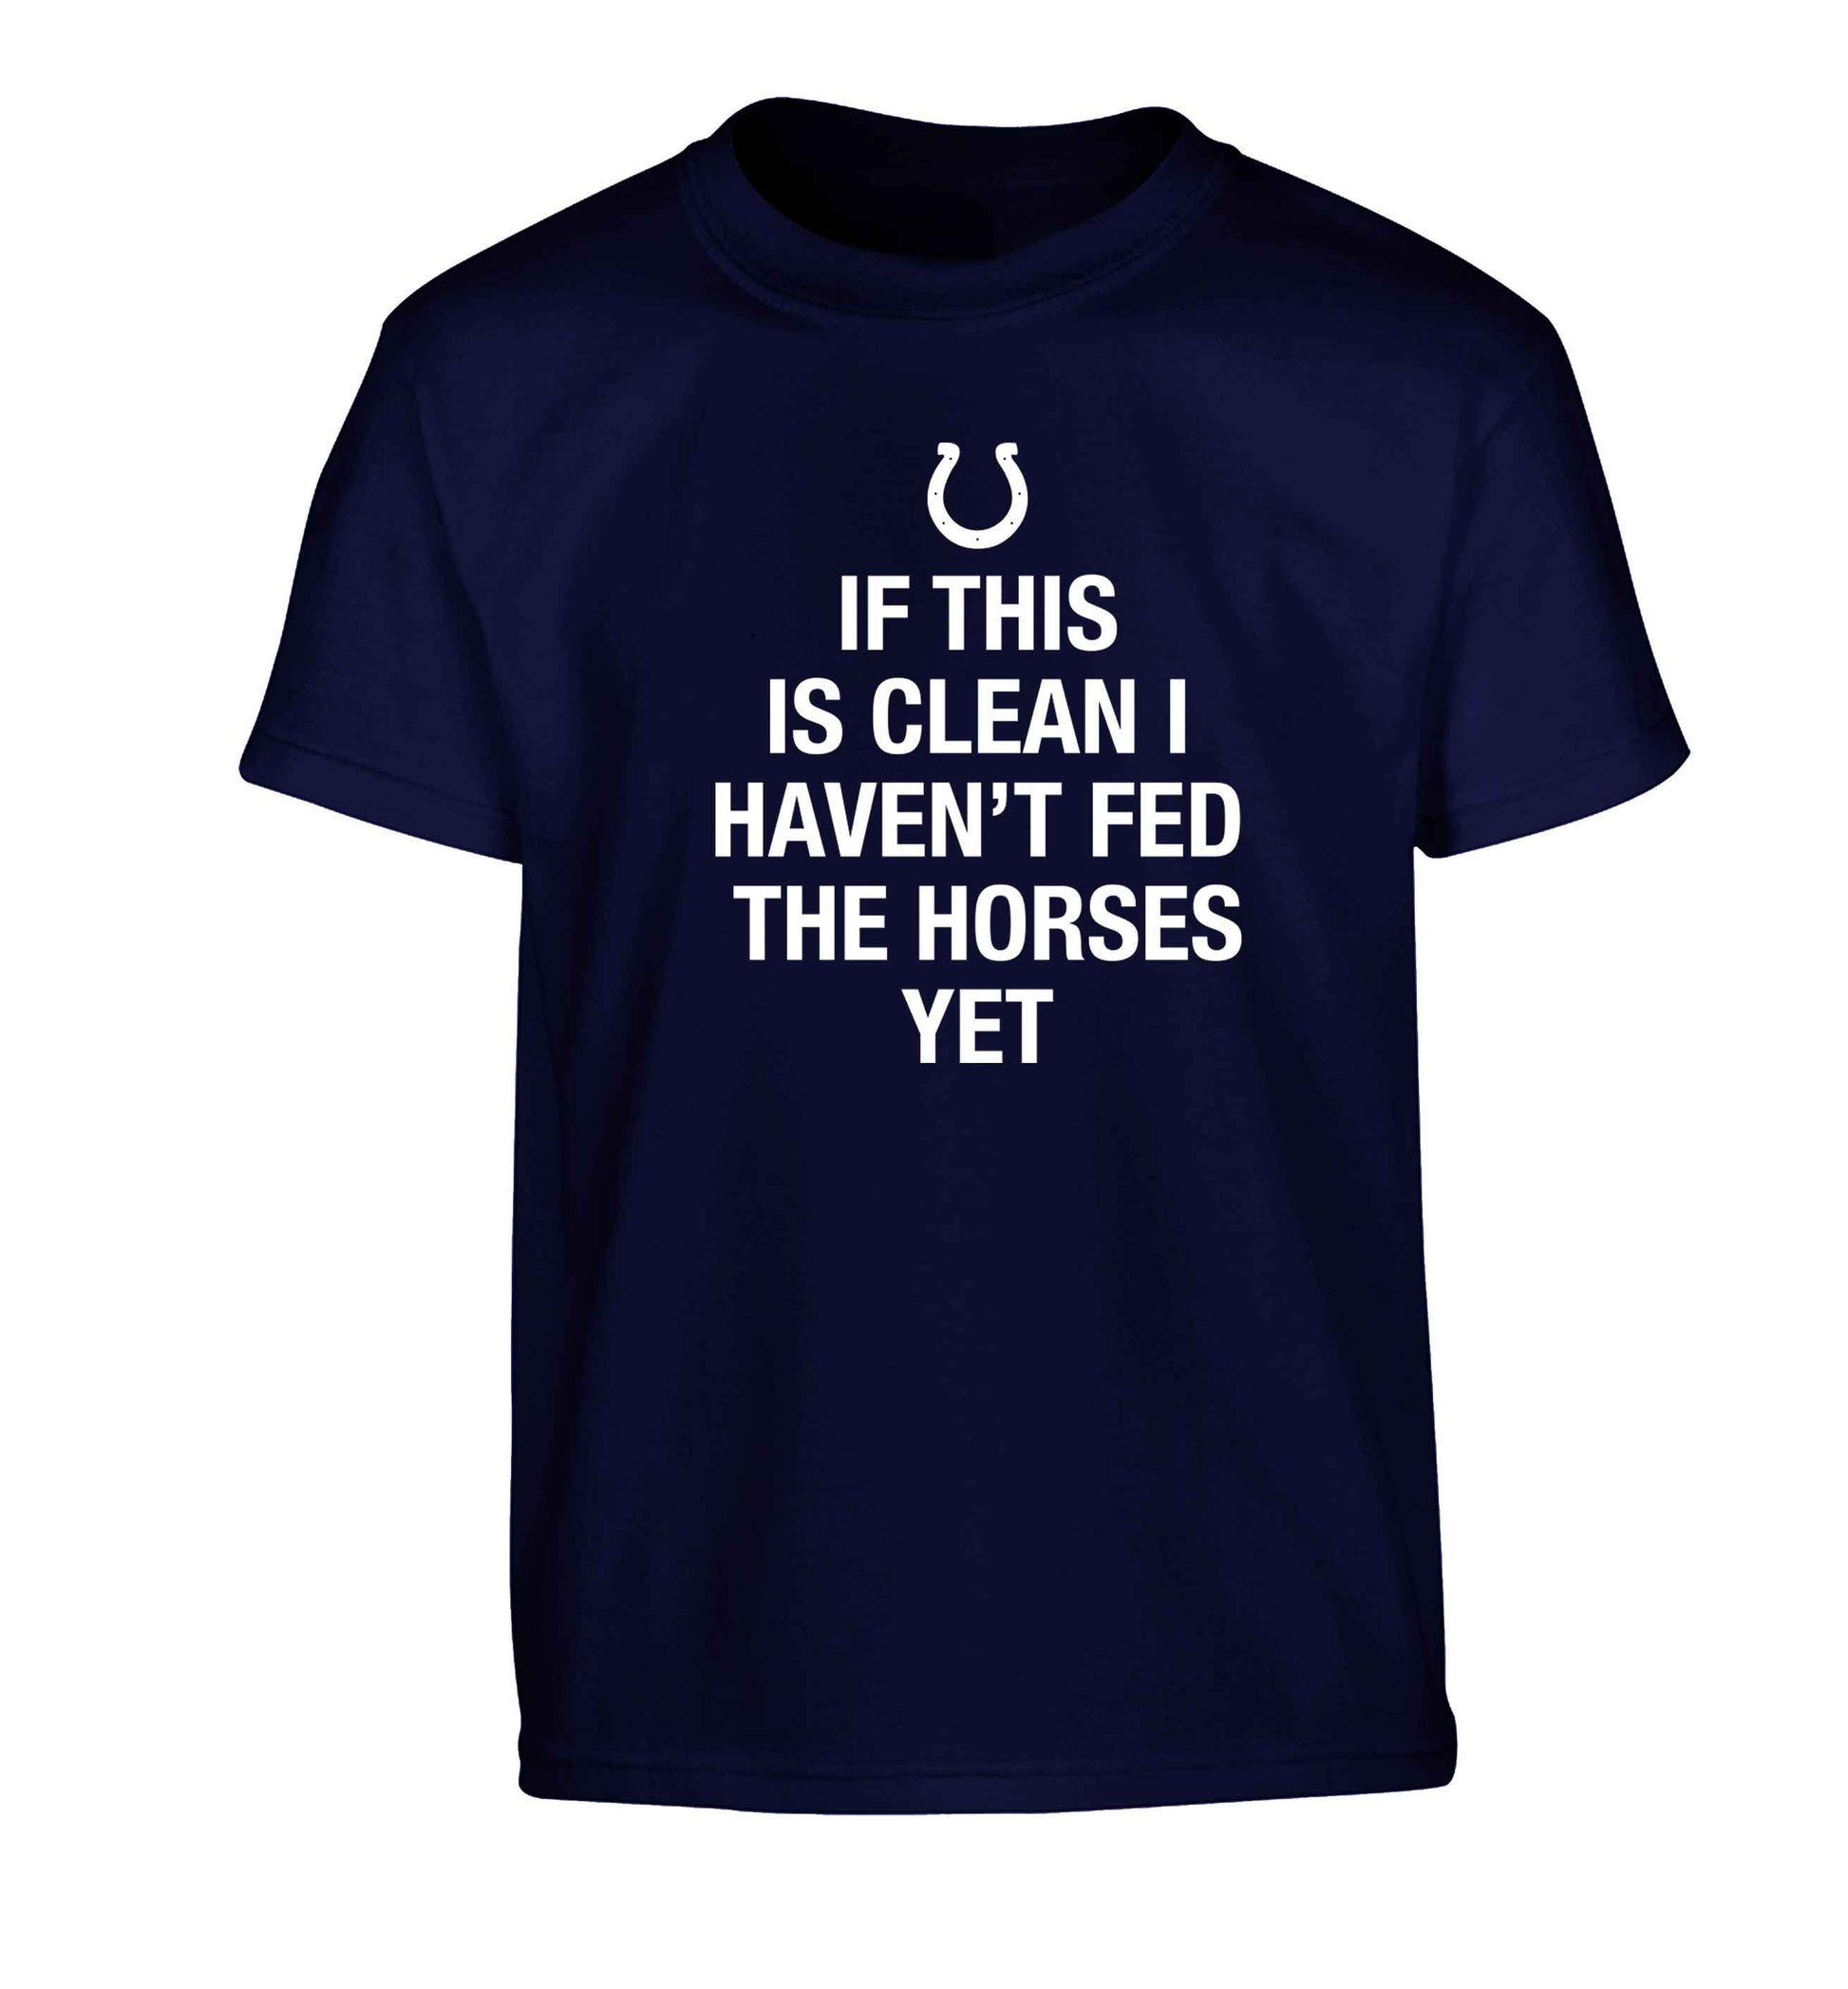 If this isn't clean I haven't fed the horses yet Children's navy Tshirt 12-13 Years